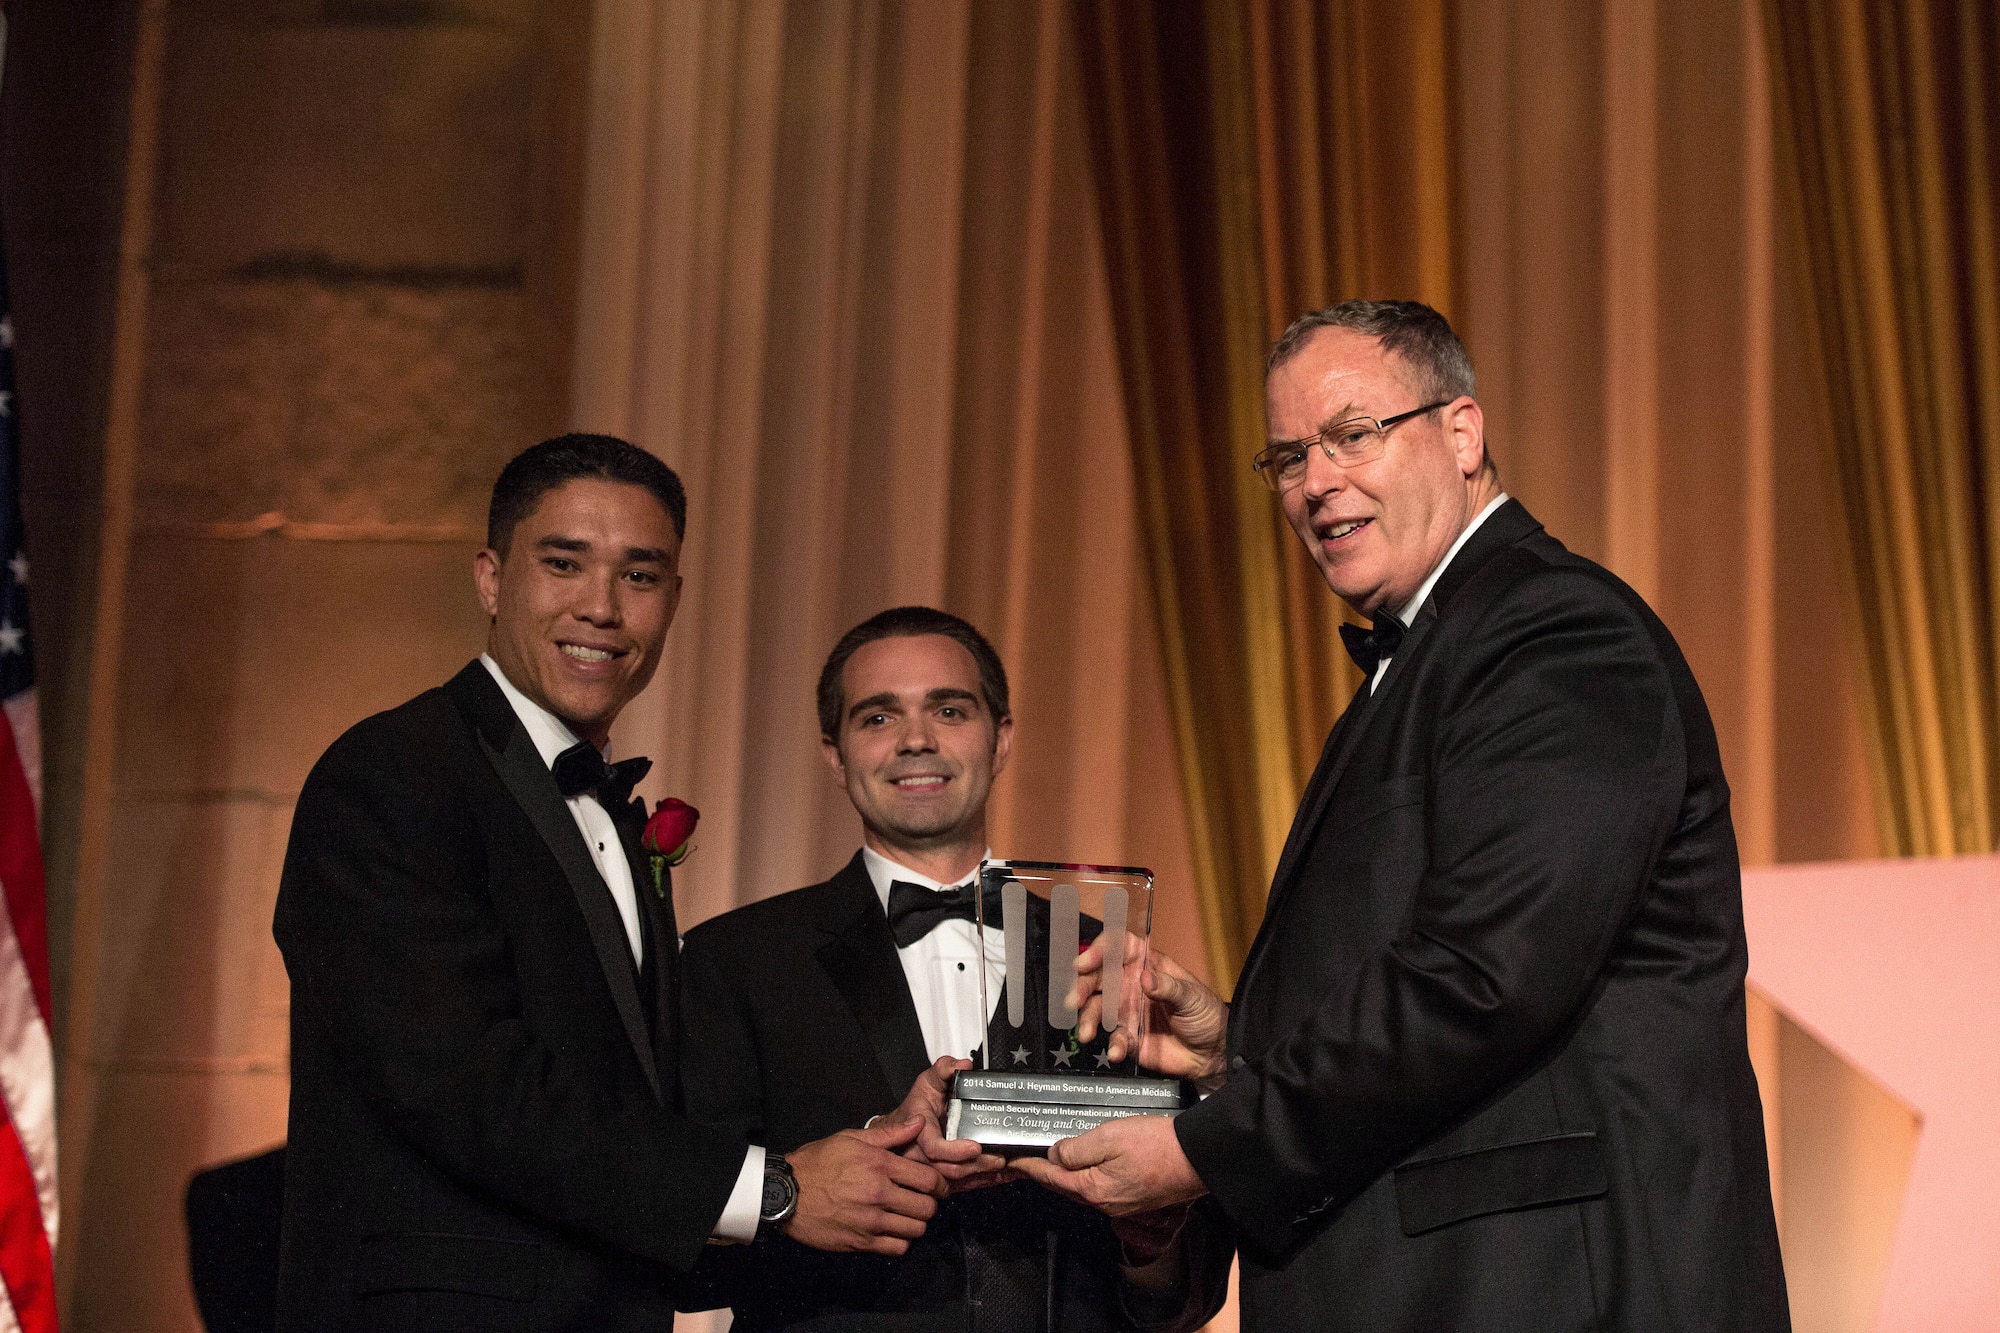 Deputy Defense Secretary Bob Work, right, presents the 2014 Samuel J. Heyman Service to America Medals to Ben Tran, left, and Sean Young, center, for their work in the field of national security and international affairs at the Sammie Awards national gala Sept. 22, 2014, in Washington, D.C. (DOD photo/U.S. Navy Petty Officer 2nd Class Sean Hurt)